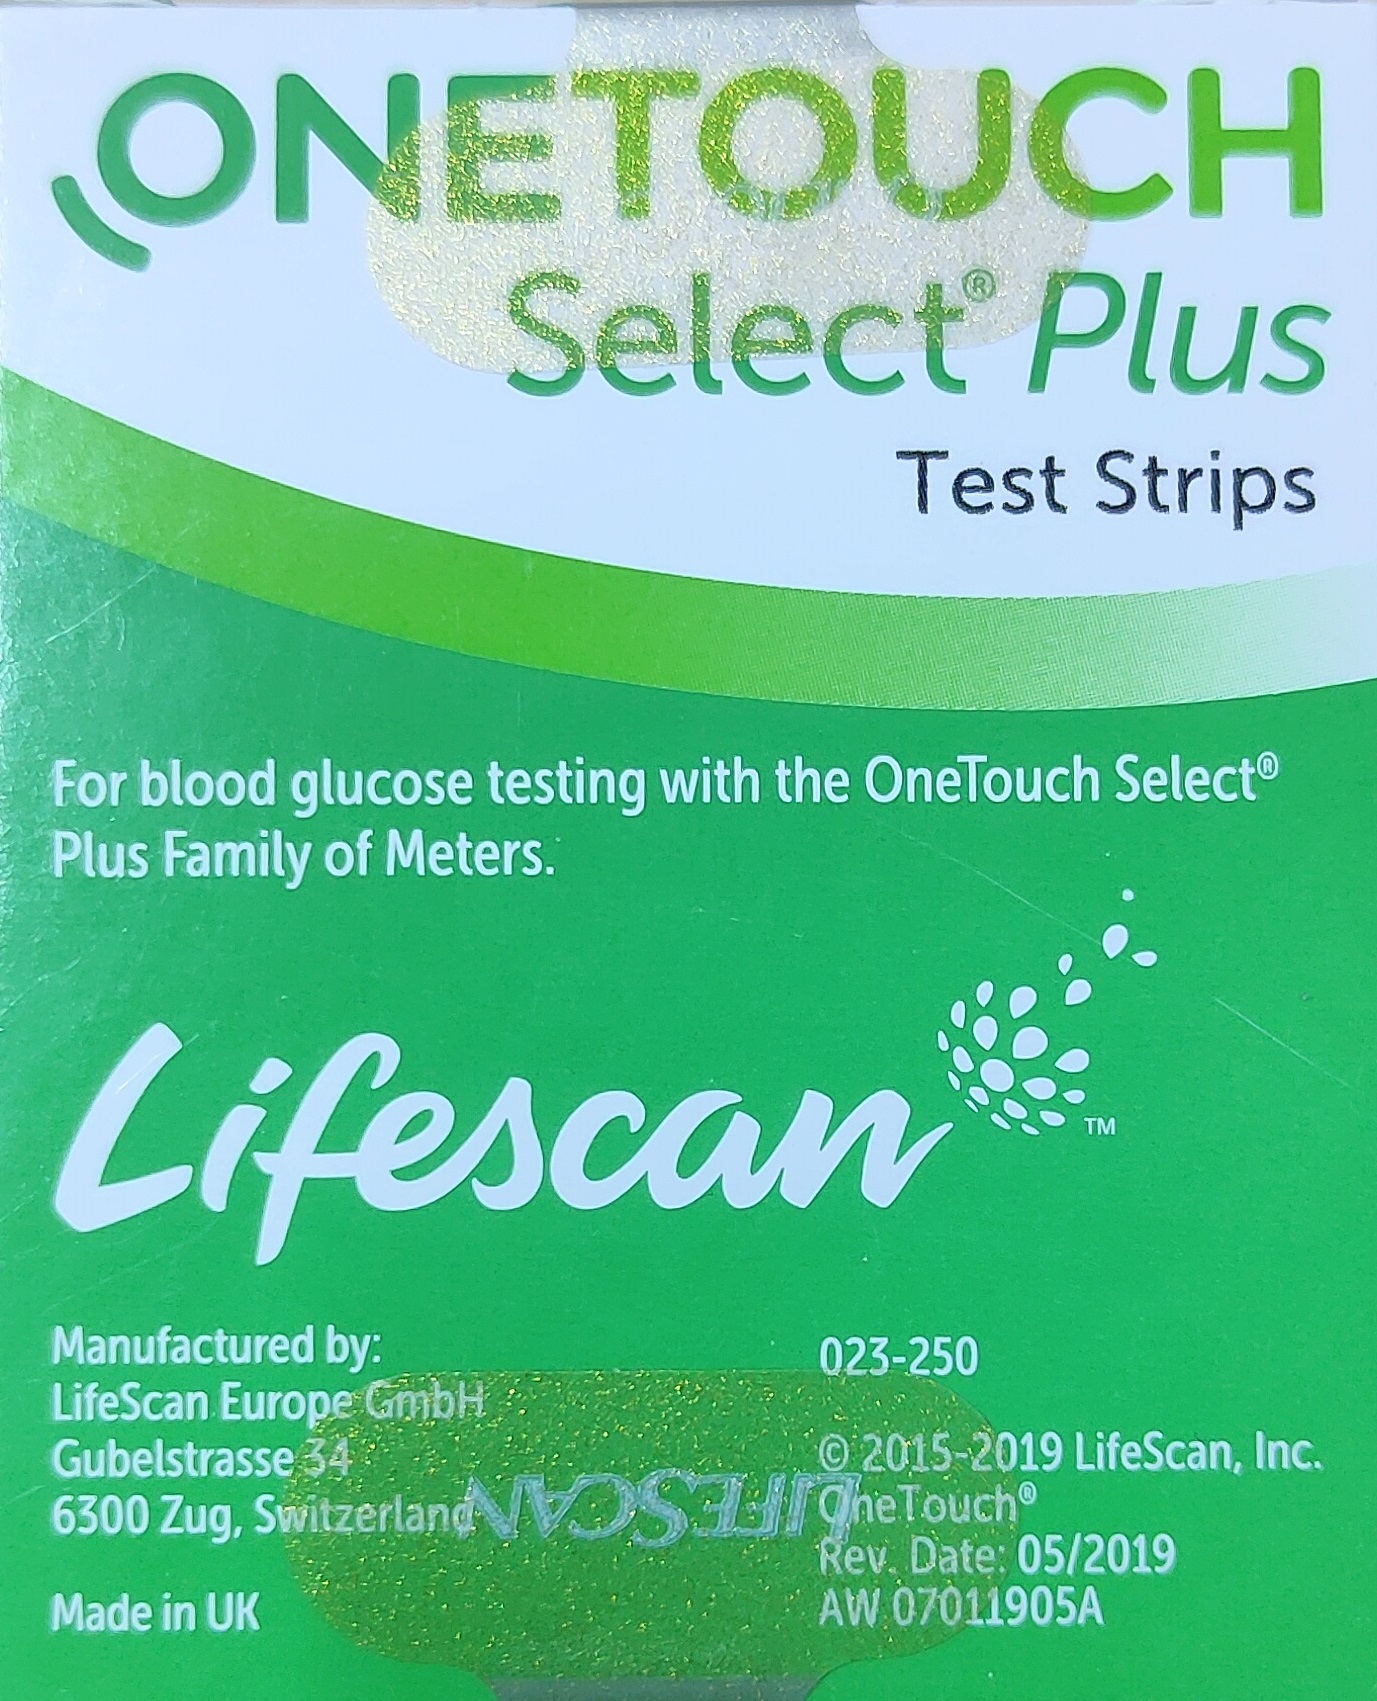 Onetouch select plus 10 Test Strips 